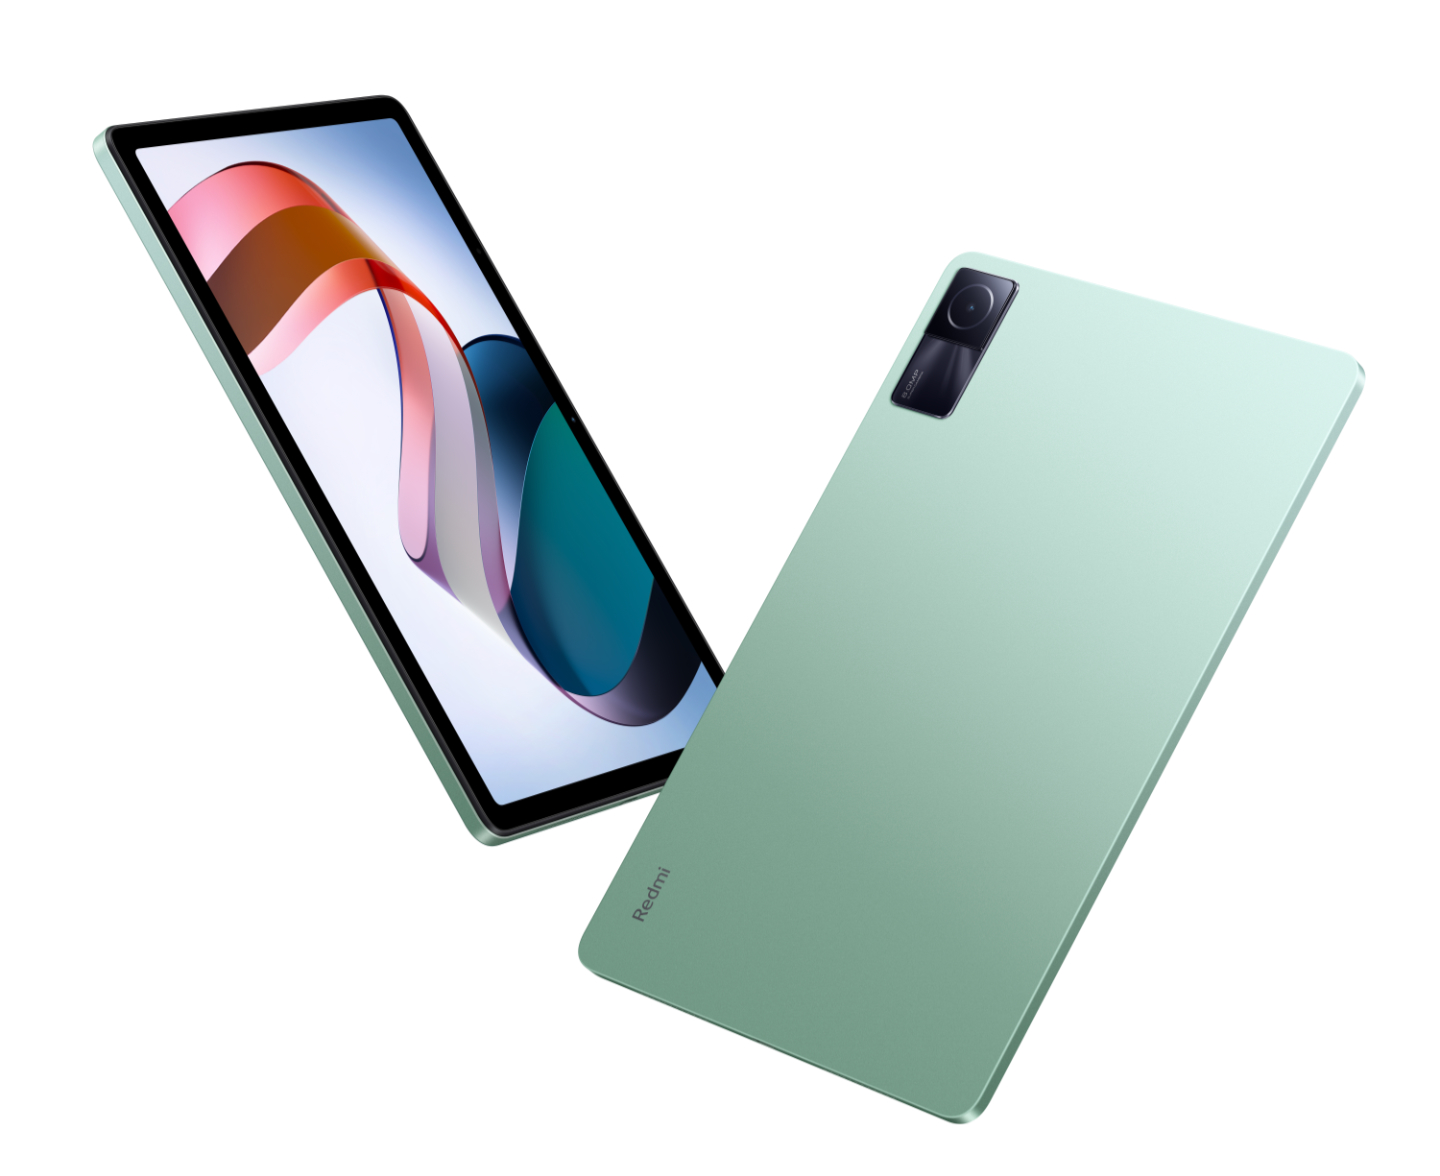 Xiaomi releases Redmi Pad in Europe with a 90 Hz display at a mid